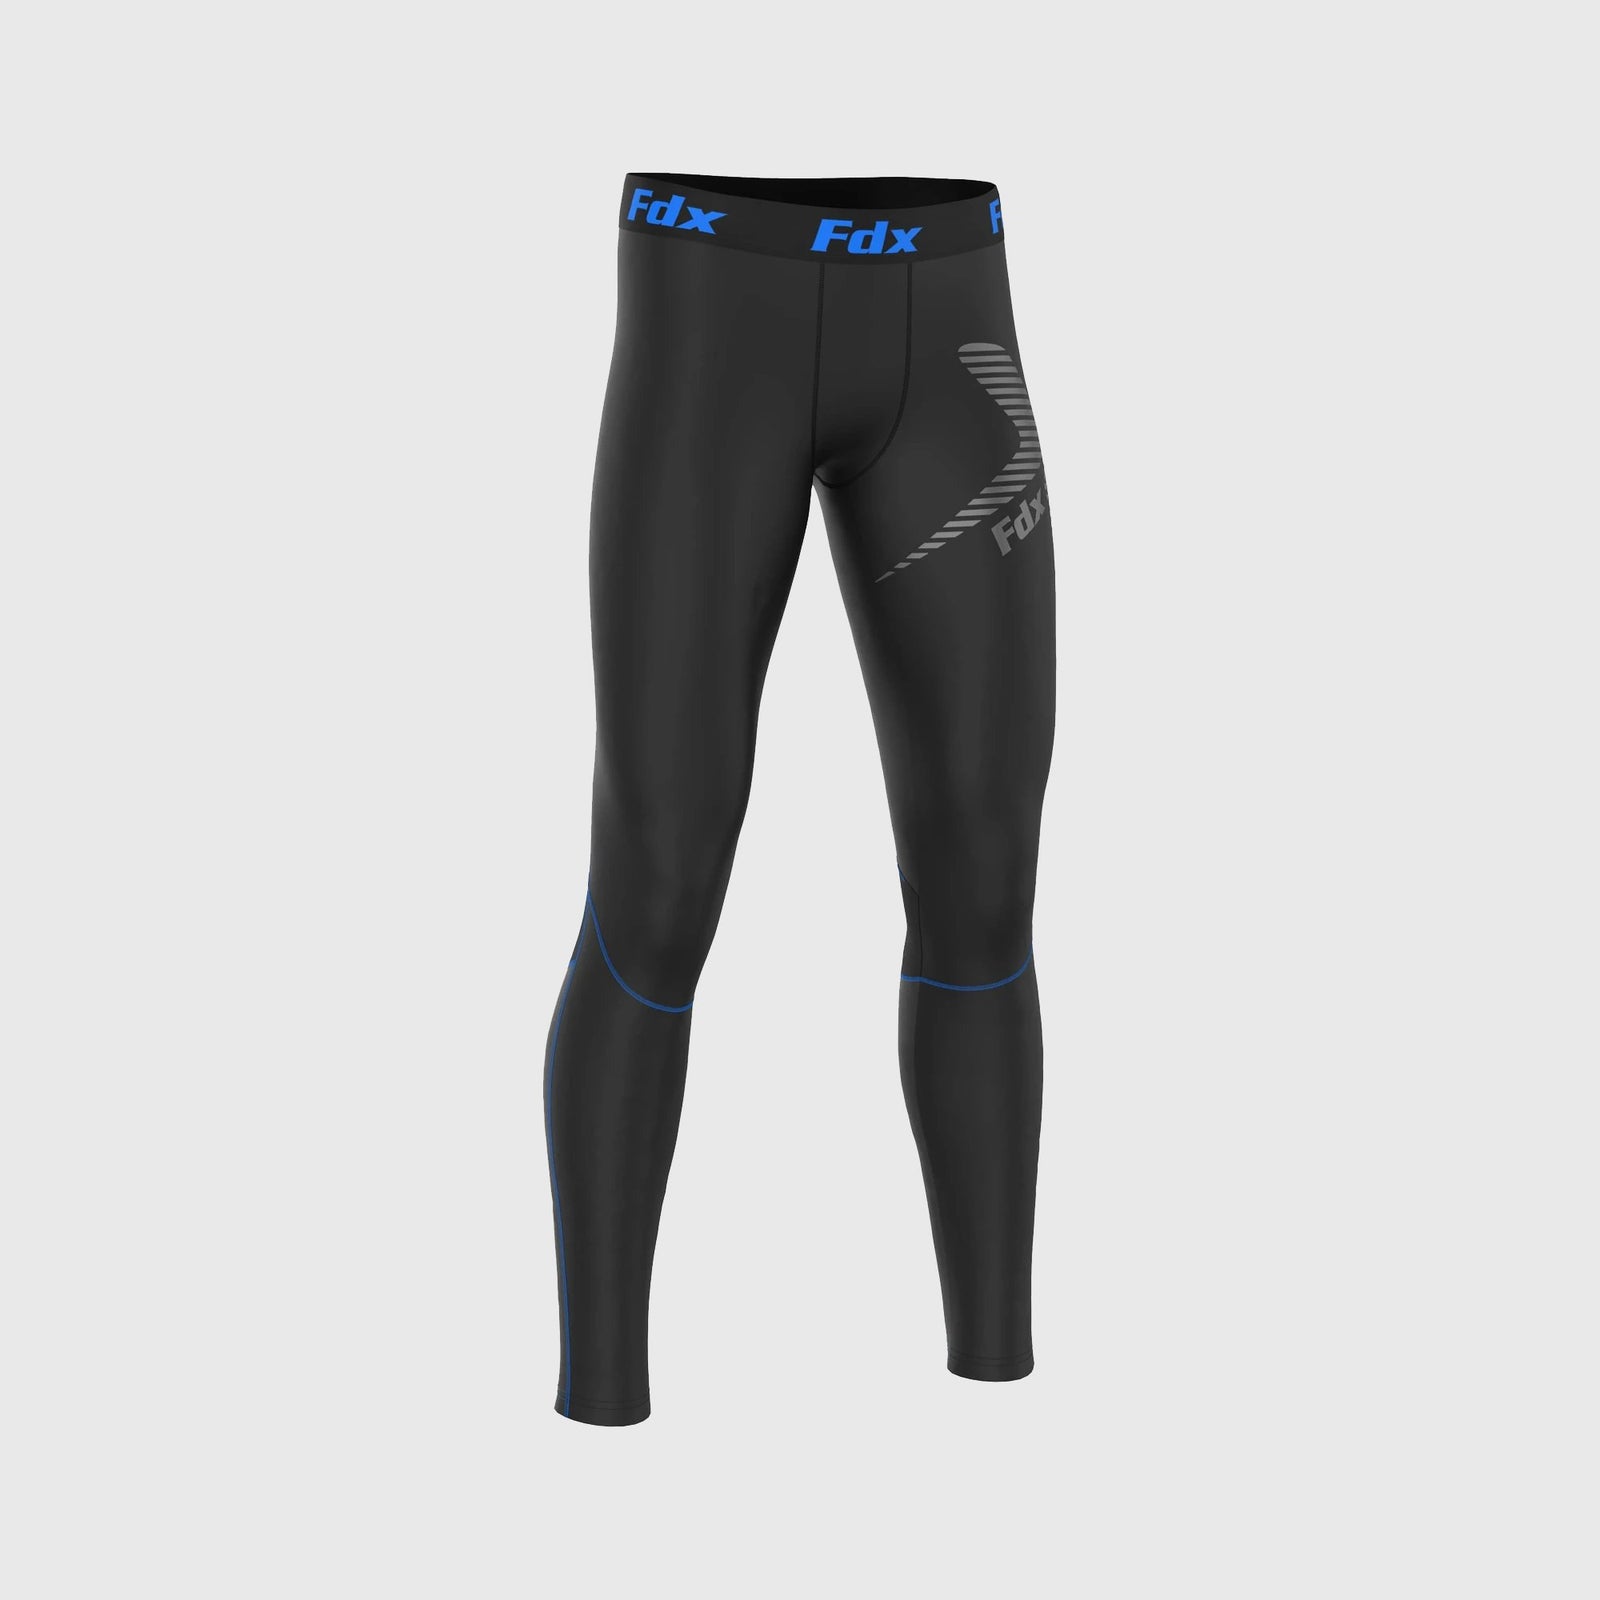 Fdx Thermolinx Men's Thermal Winter Compression Tights Red & Blue 